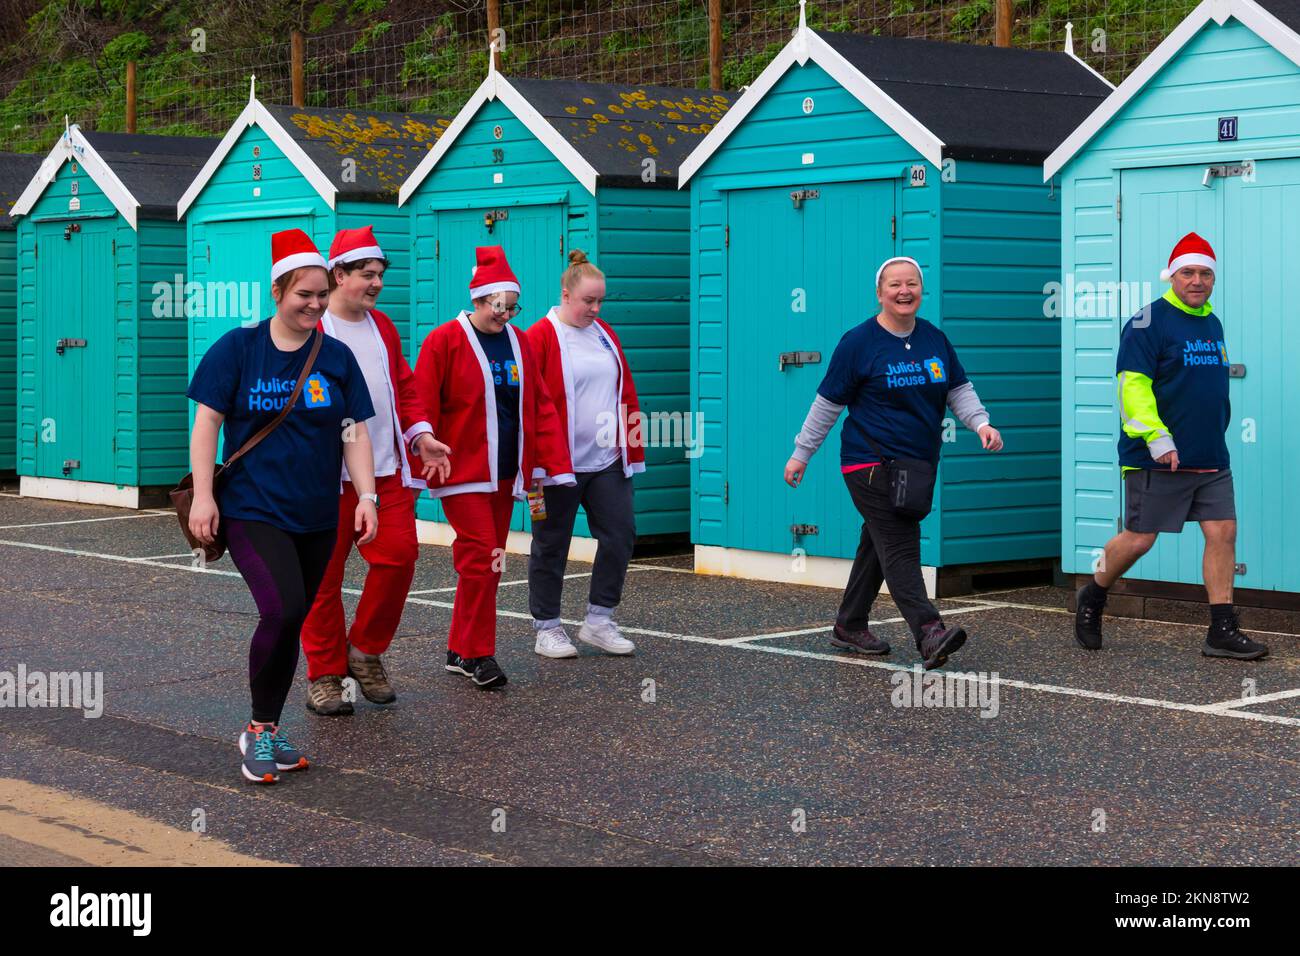 Bournemouth, Dorset UK. 27th November 2022. Supporters of Julias House, a local childrens hospice charity, dress in their Santa suits to run, or walk, the 5km Santa Dash from Bournemouth Pier along the seafront at Bournemouth, raising funds for the charity. Credit: Carolyn Jenkins/Alamy Live News Stock Photo